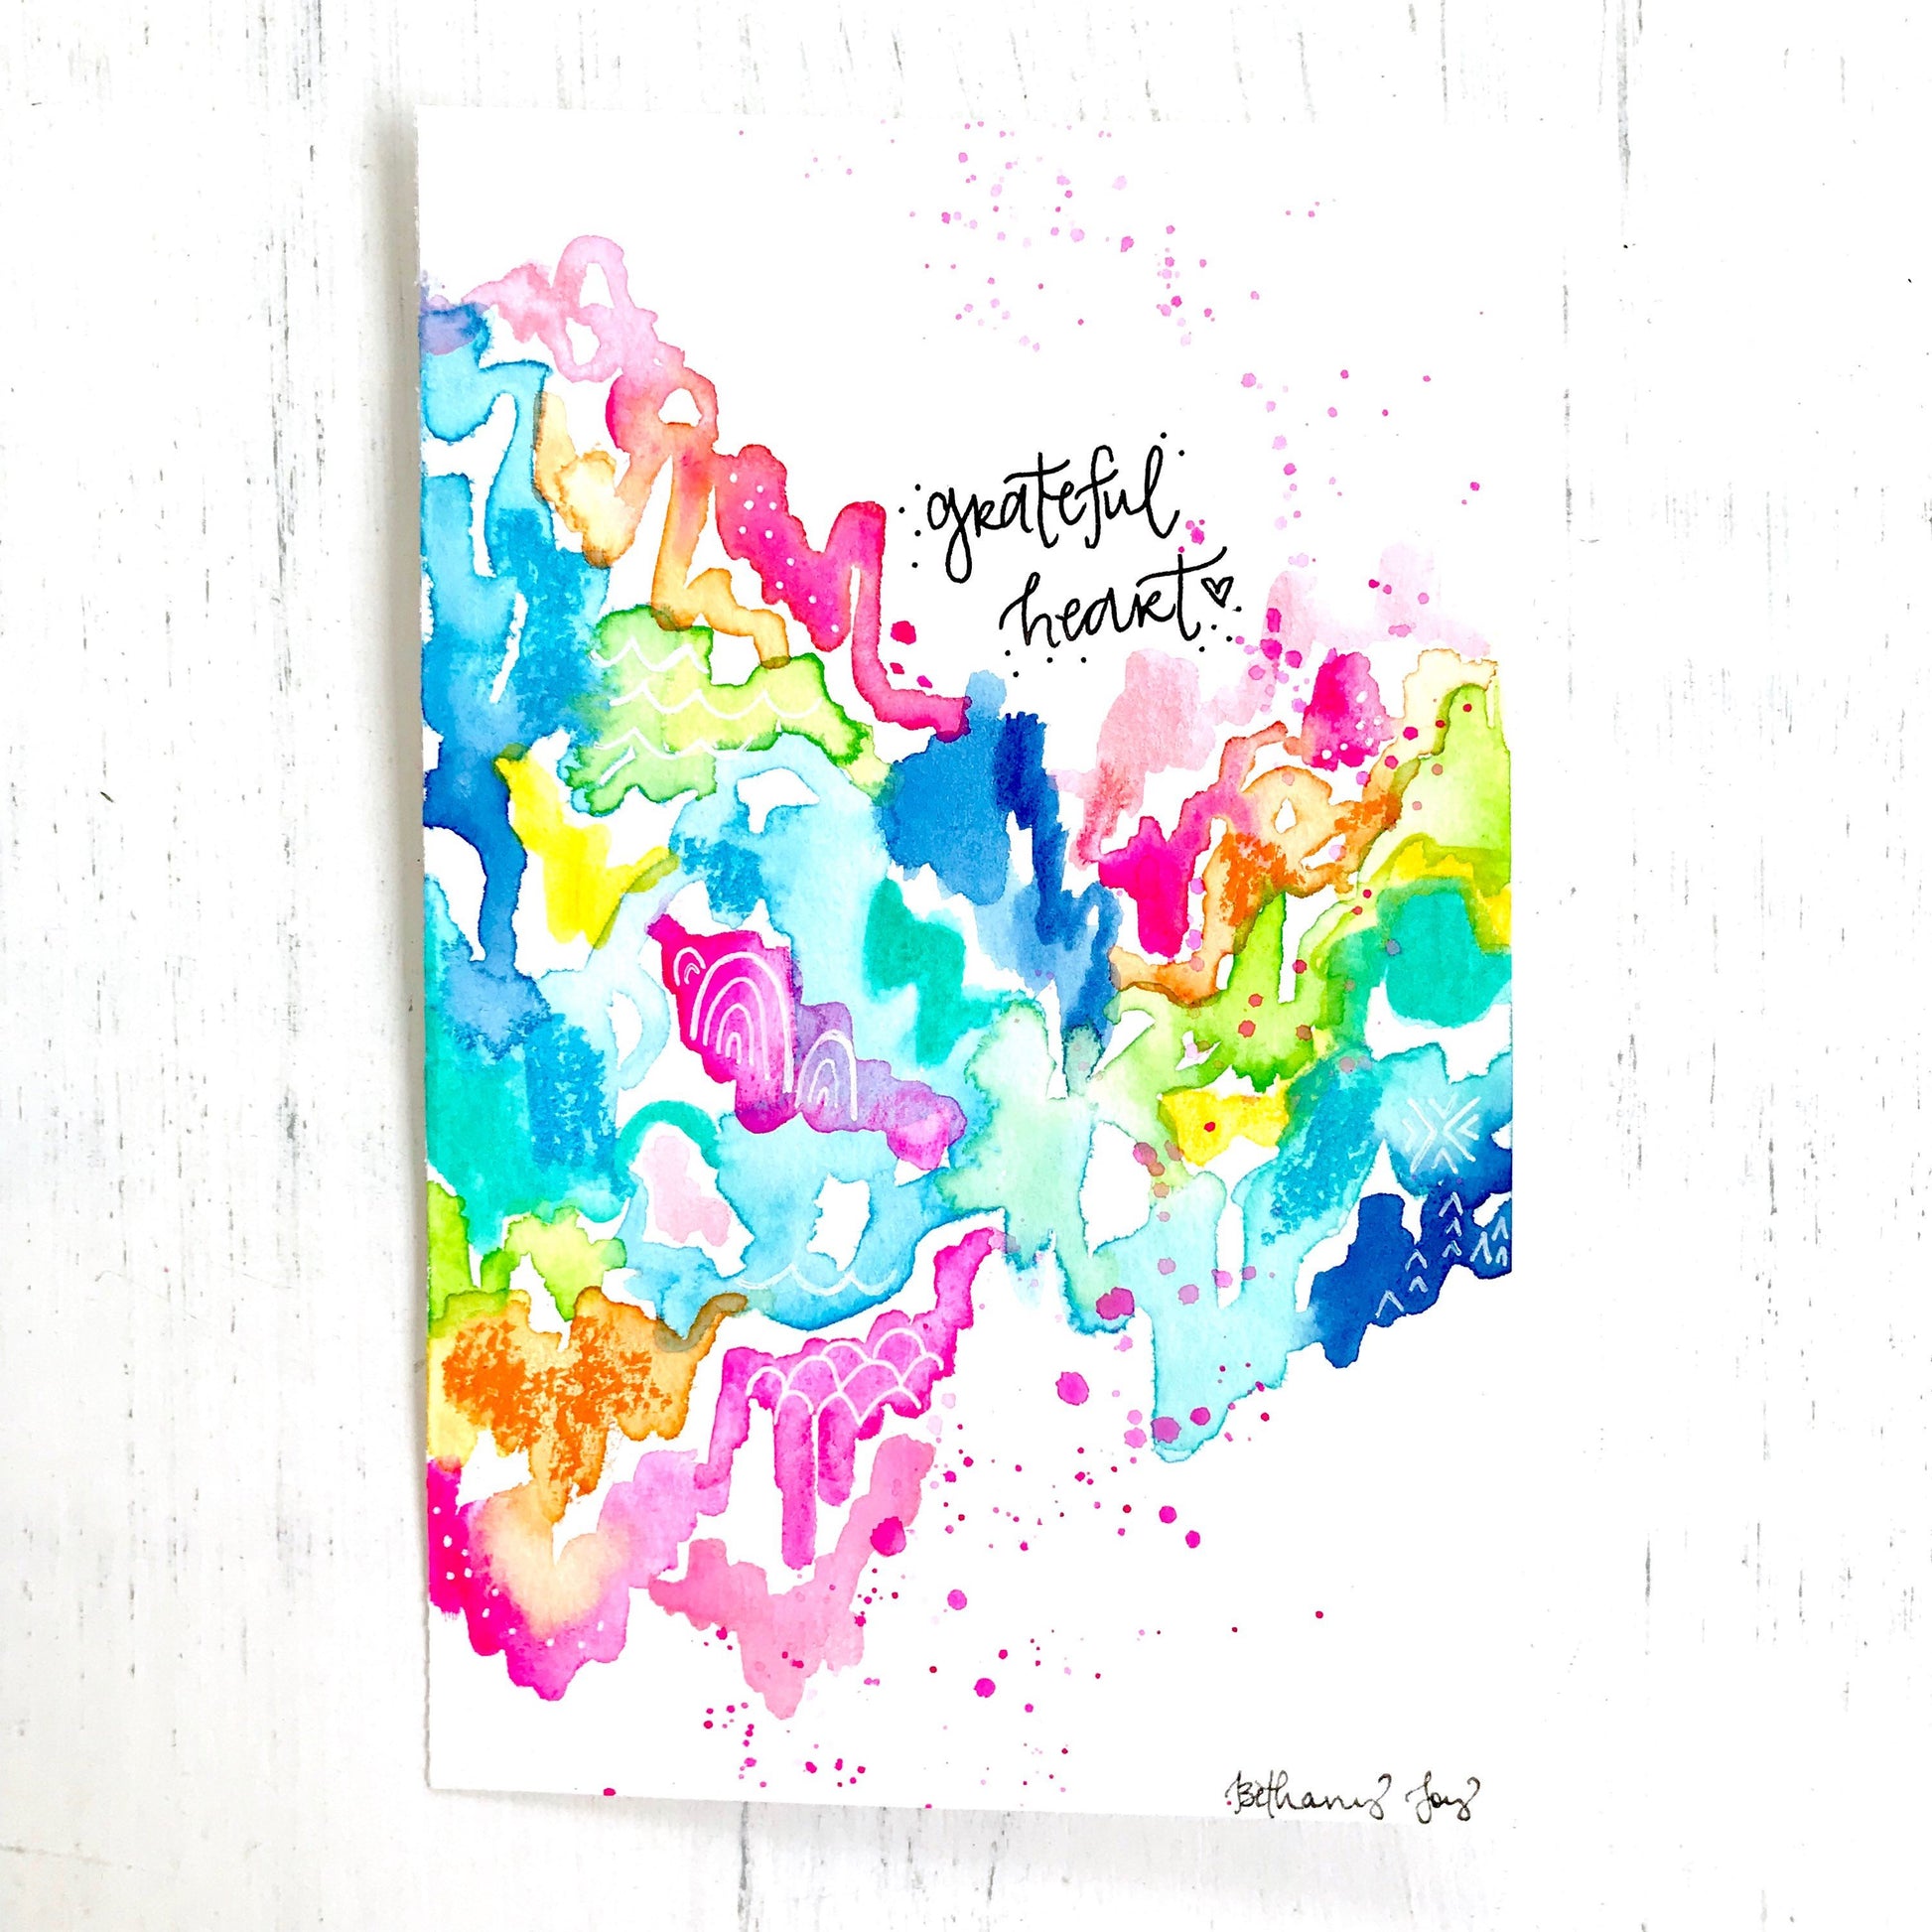 Mixed media original painting "grateful heart" on 6x9 inch watercolor paper with white mat to fit 8x10 inch frame / travel inspired painting - Bethany Joy Art